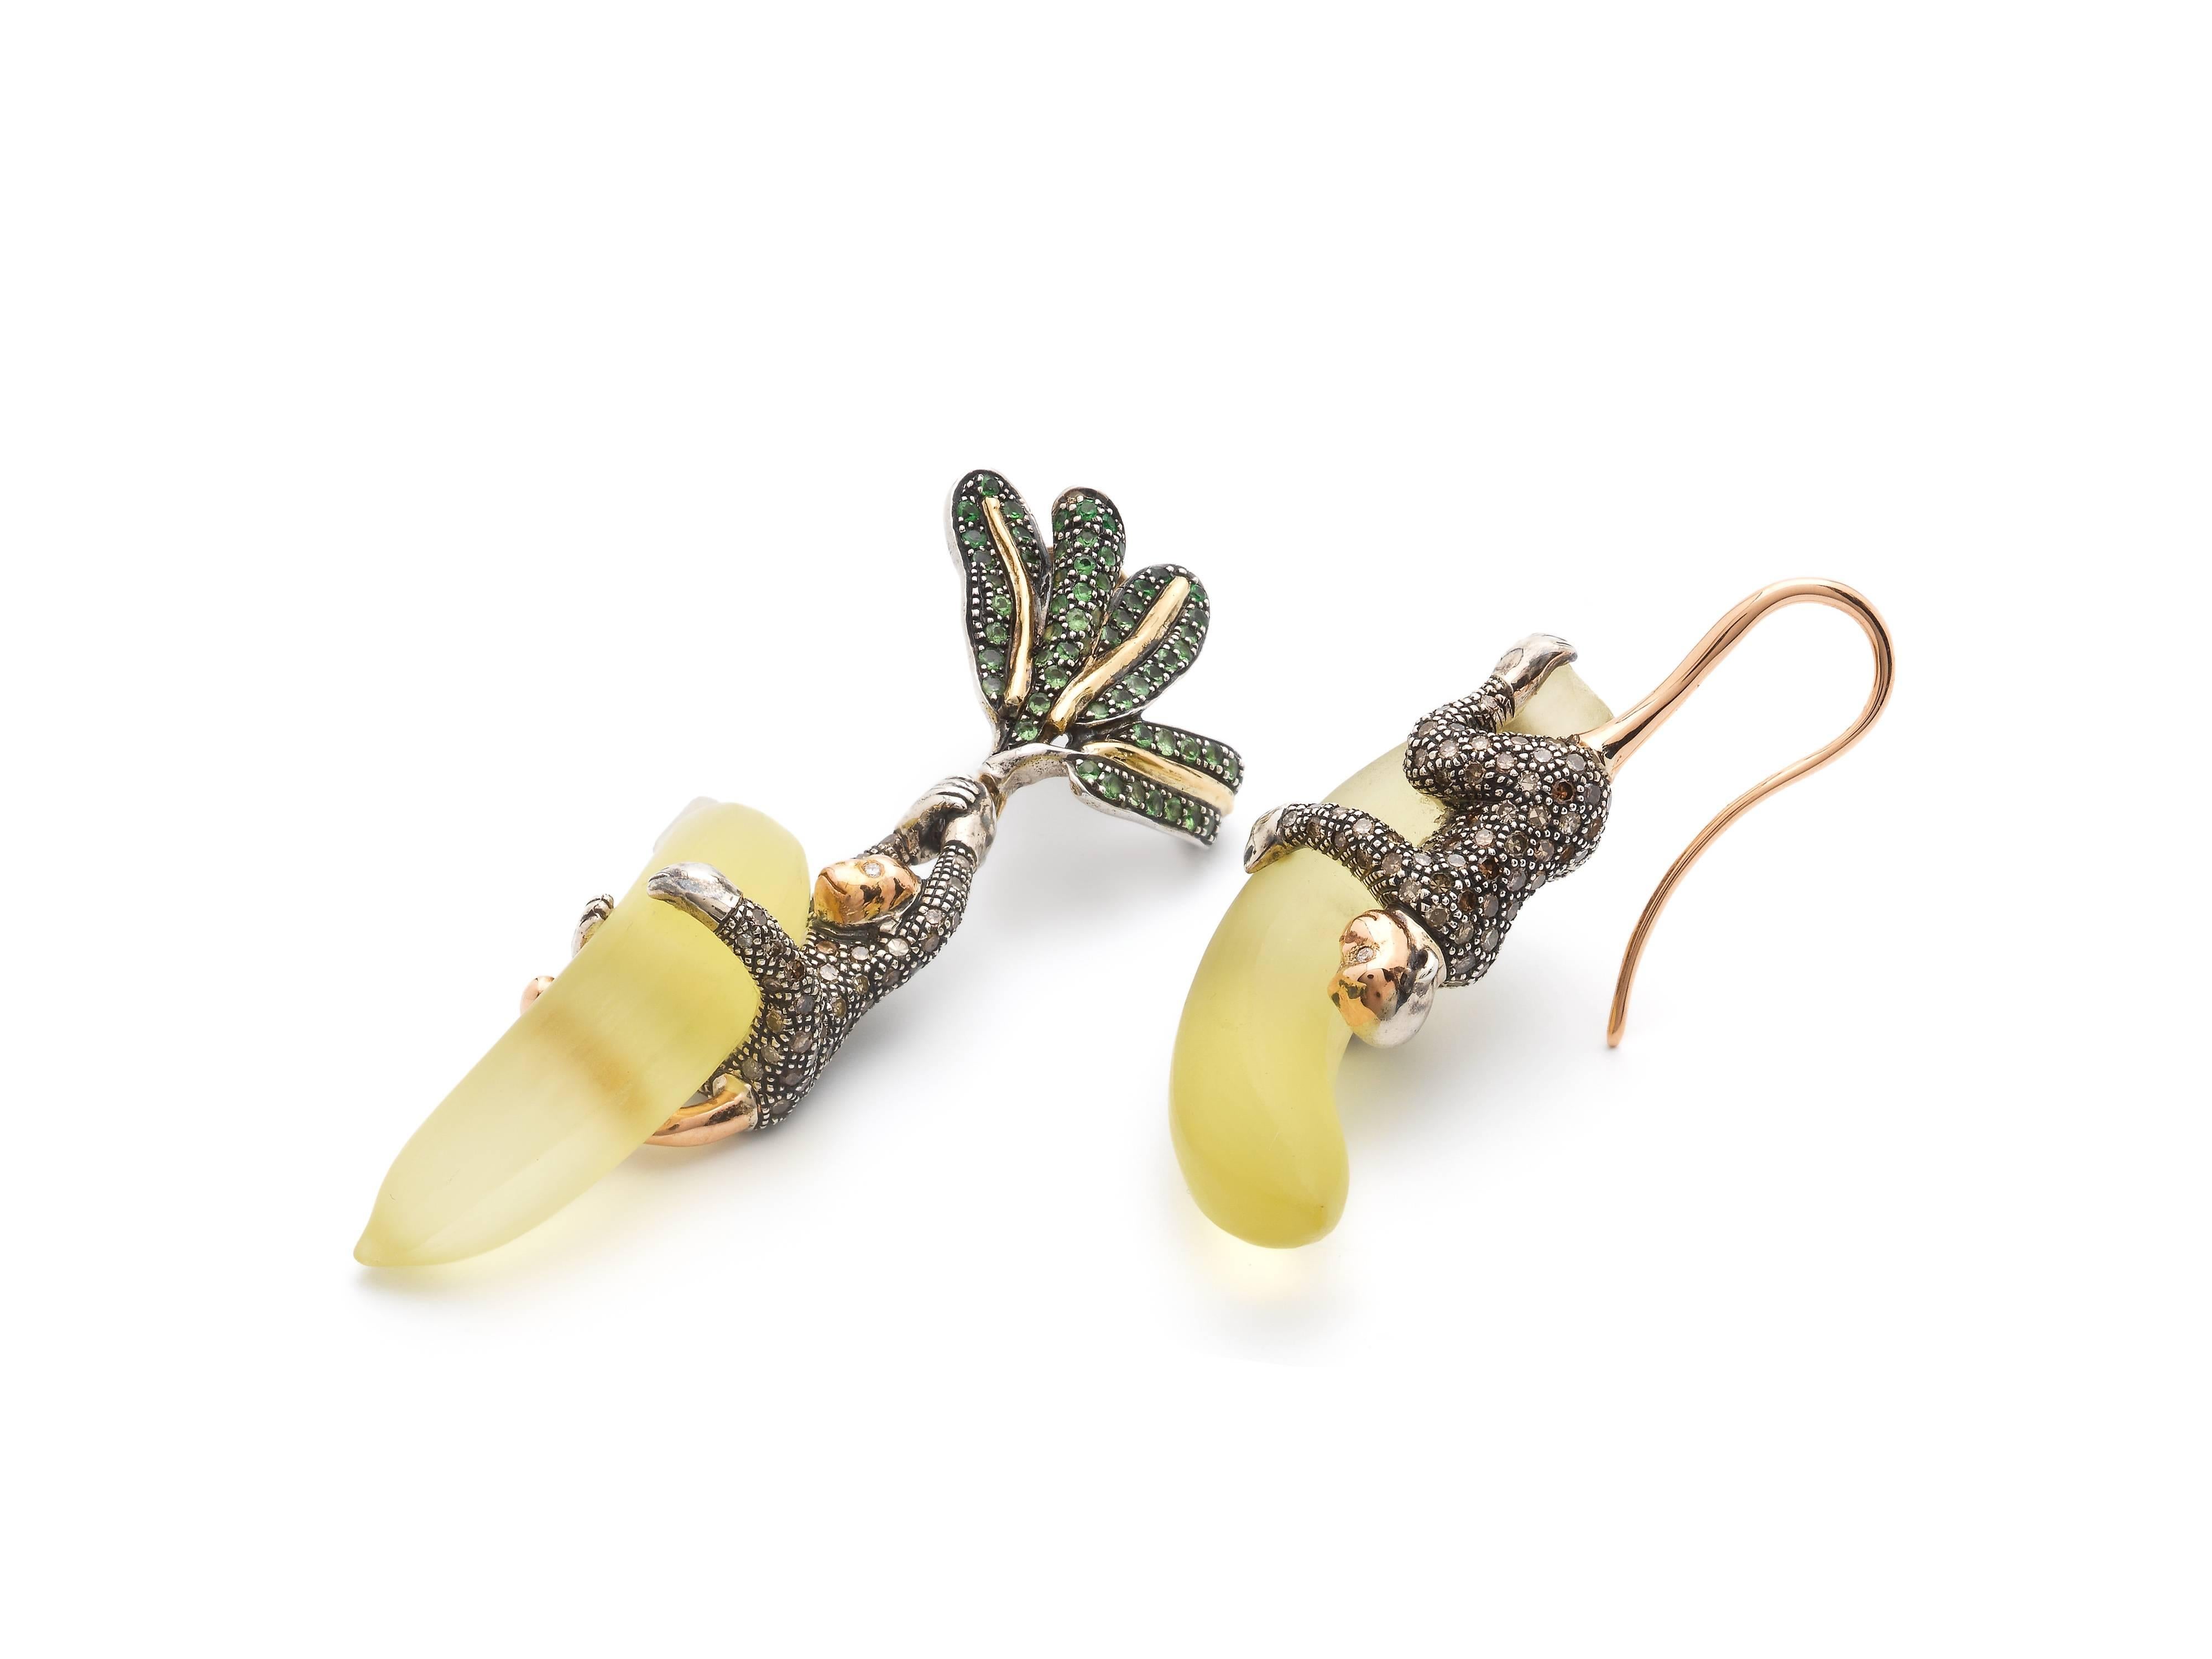 These fun, asymmetrical earrings show two monkeys made of 18k rose gold and sterling silver. Set with brown and white diamonds, they hold on tight to their hand-carved lemon quartz bananas. The palm leafs are embellished with vivid green Tsavorites